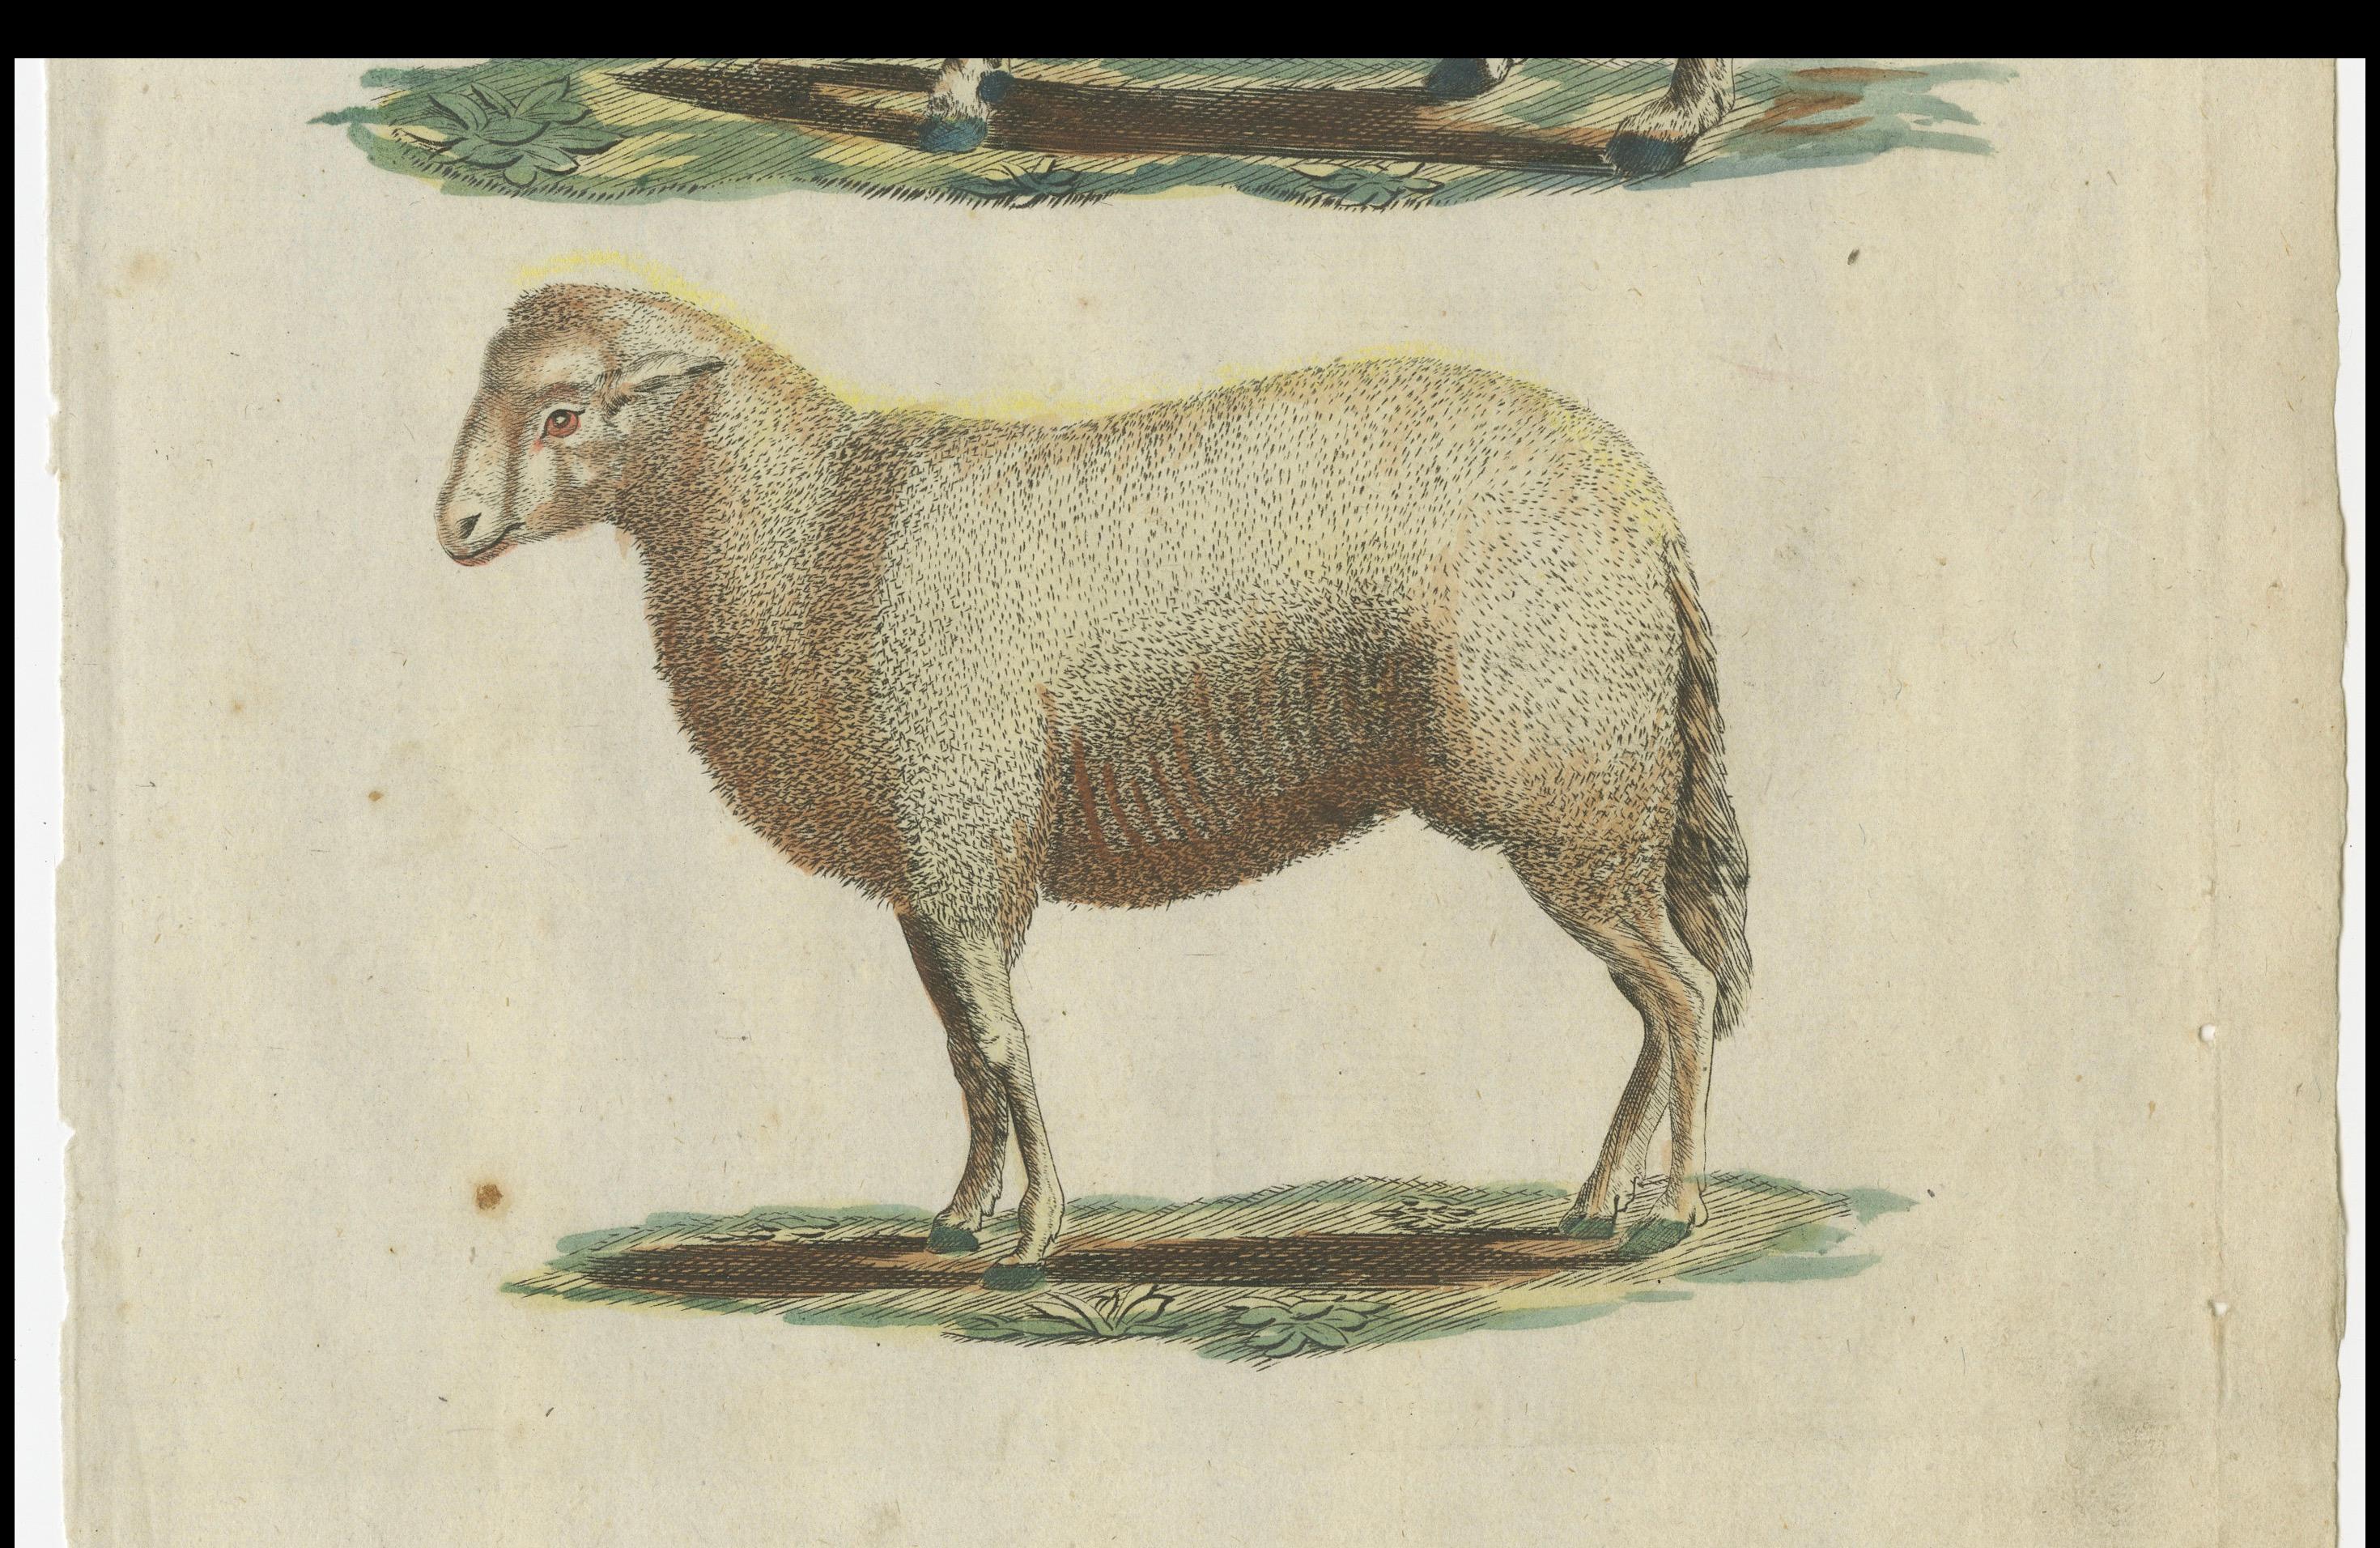 Original antique print of a sheep and ram. This engraved print originates from a very rare unknown Dutch work. The plates are similar to the plates in the famous German work: ‘Bilderbuch fur Kinder' by F.J. Bertuch, published 1790-1830 in Weimar.